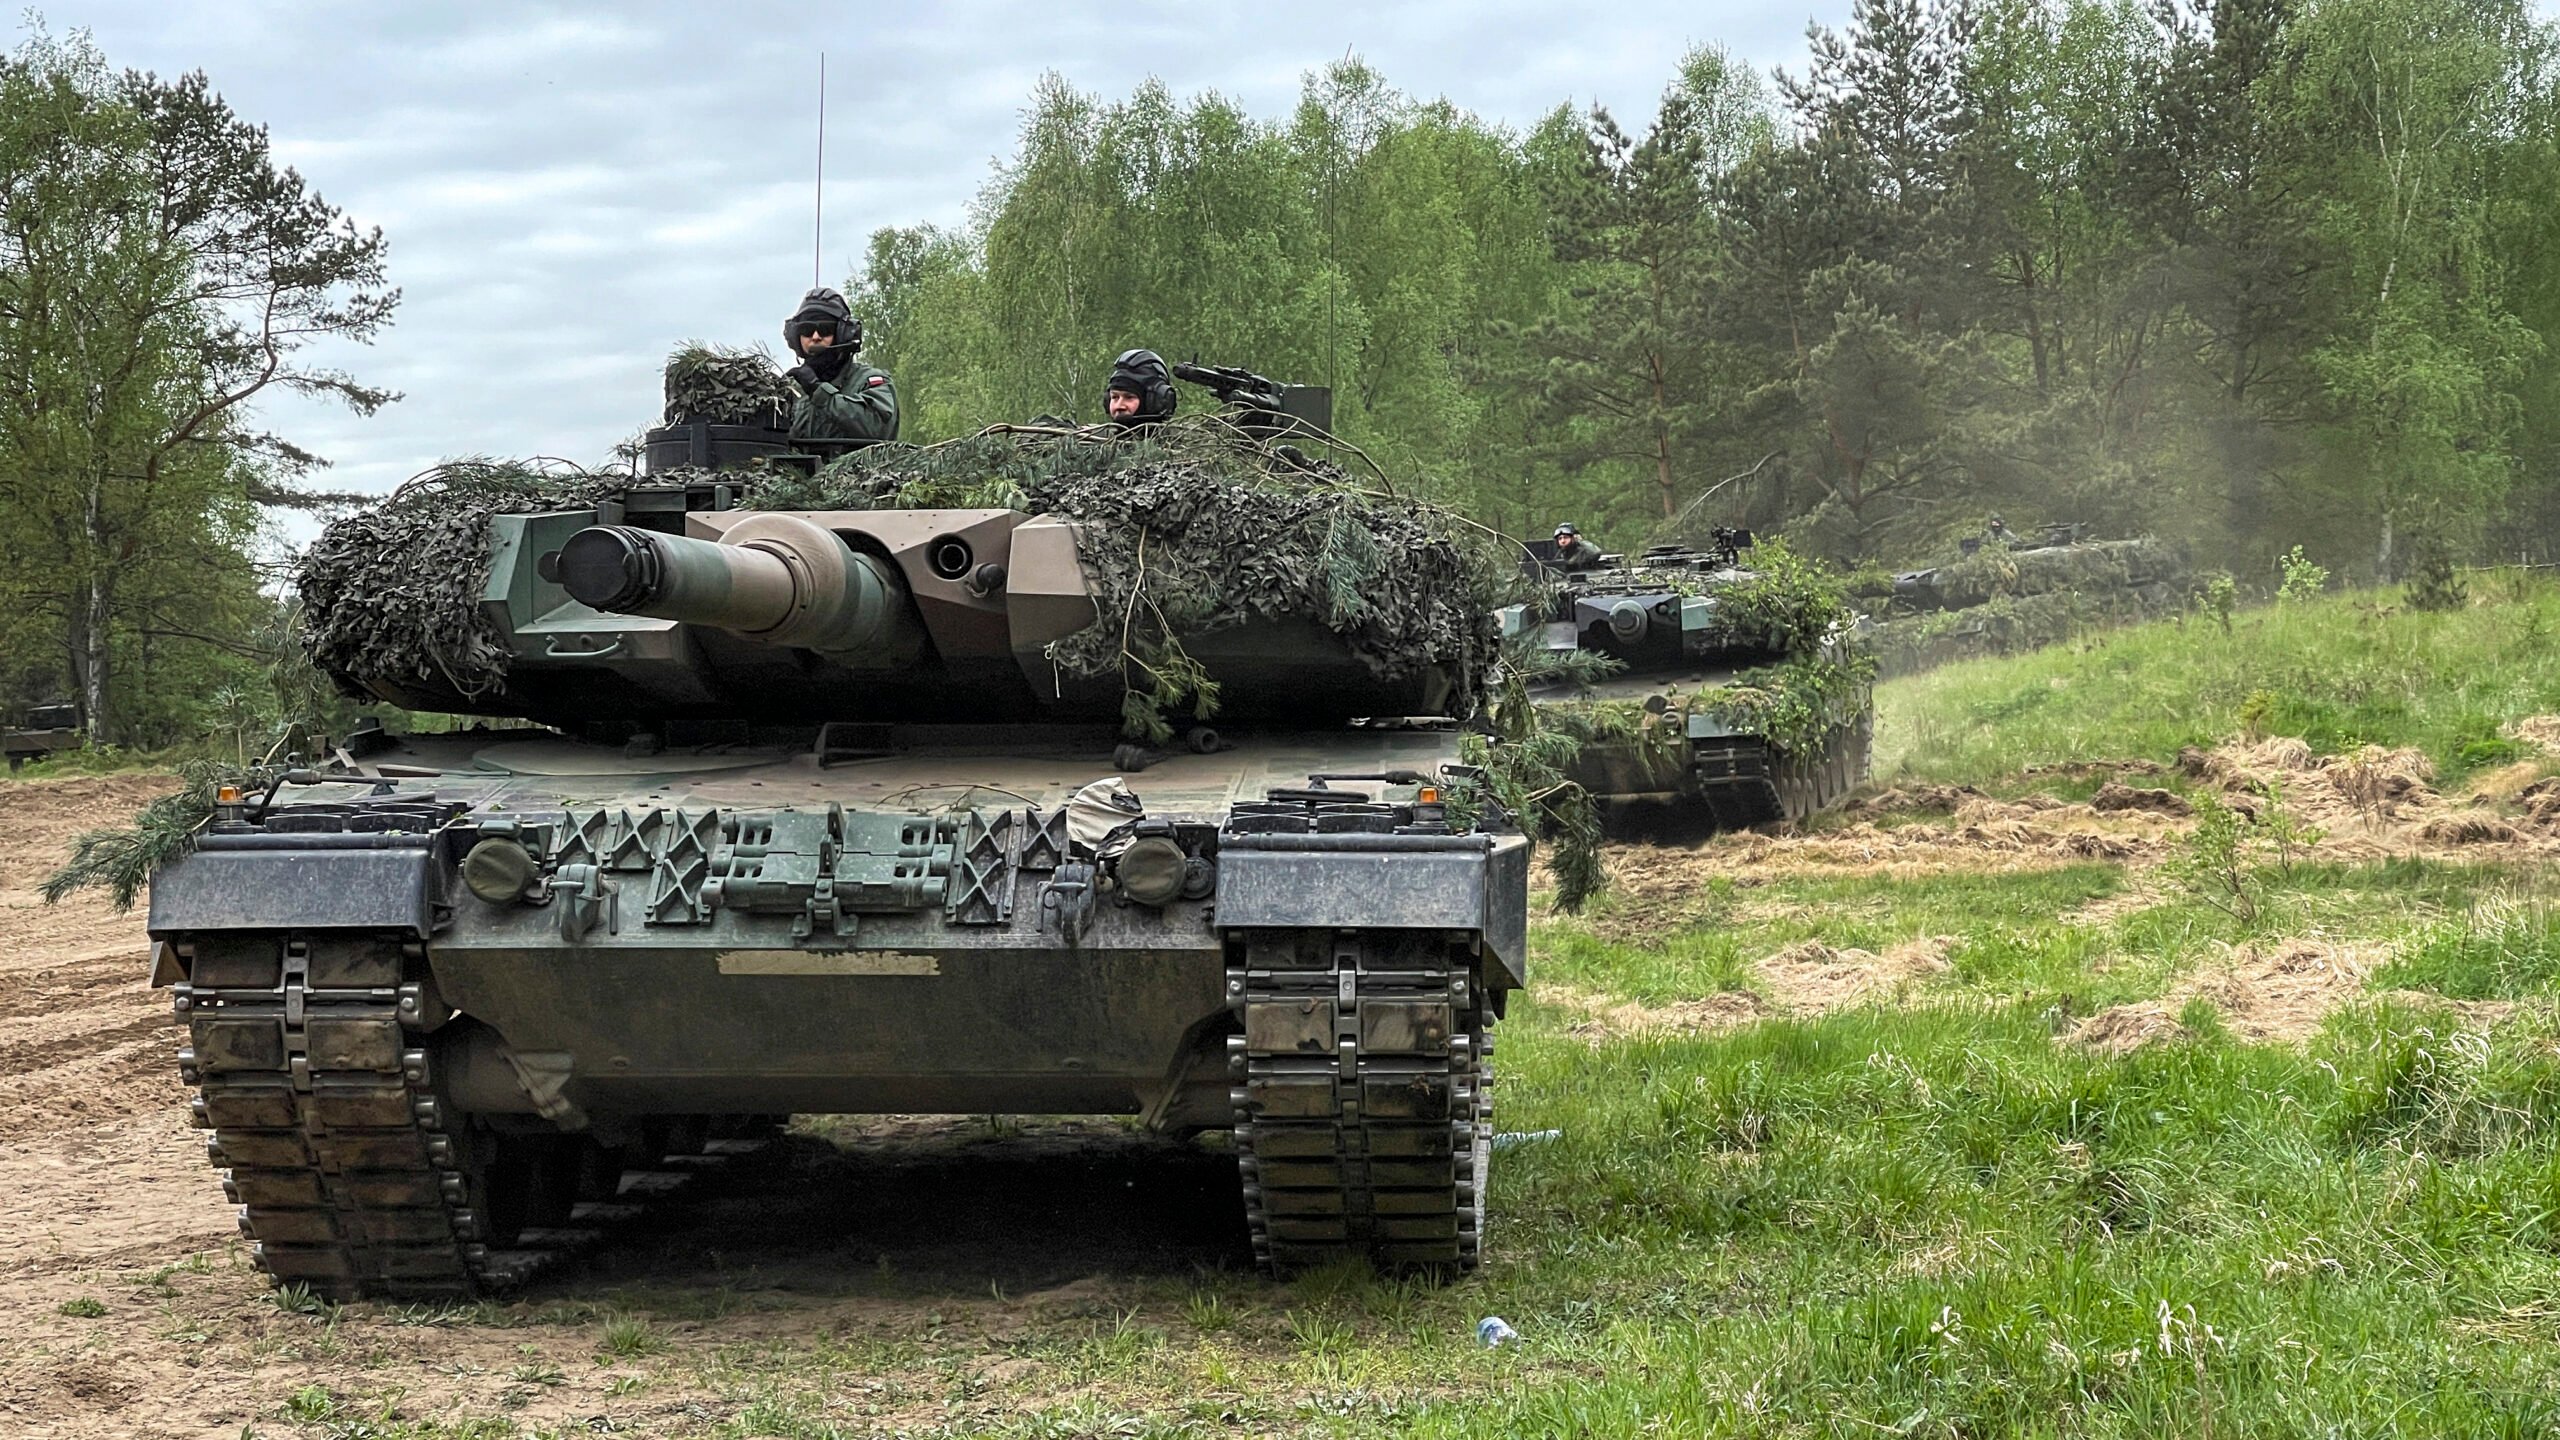 Canada considers delivering four Leopard tanks to Ukraine